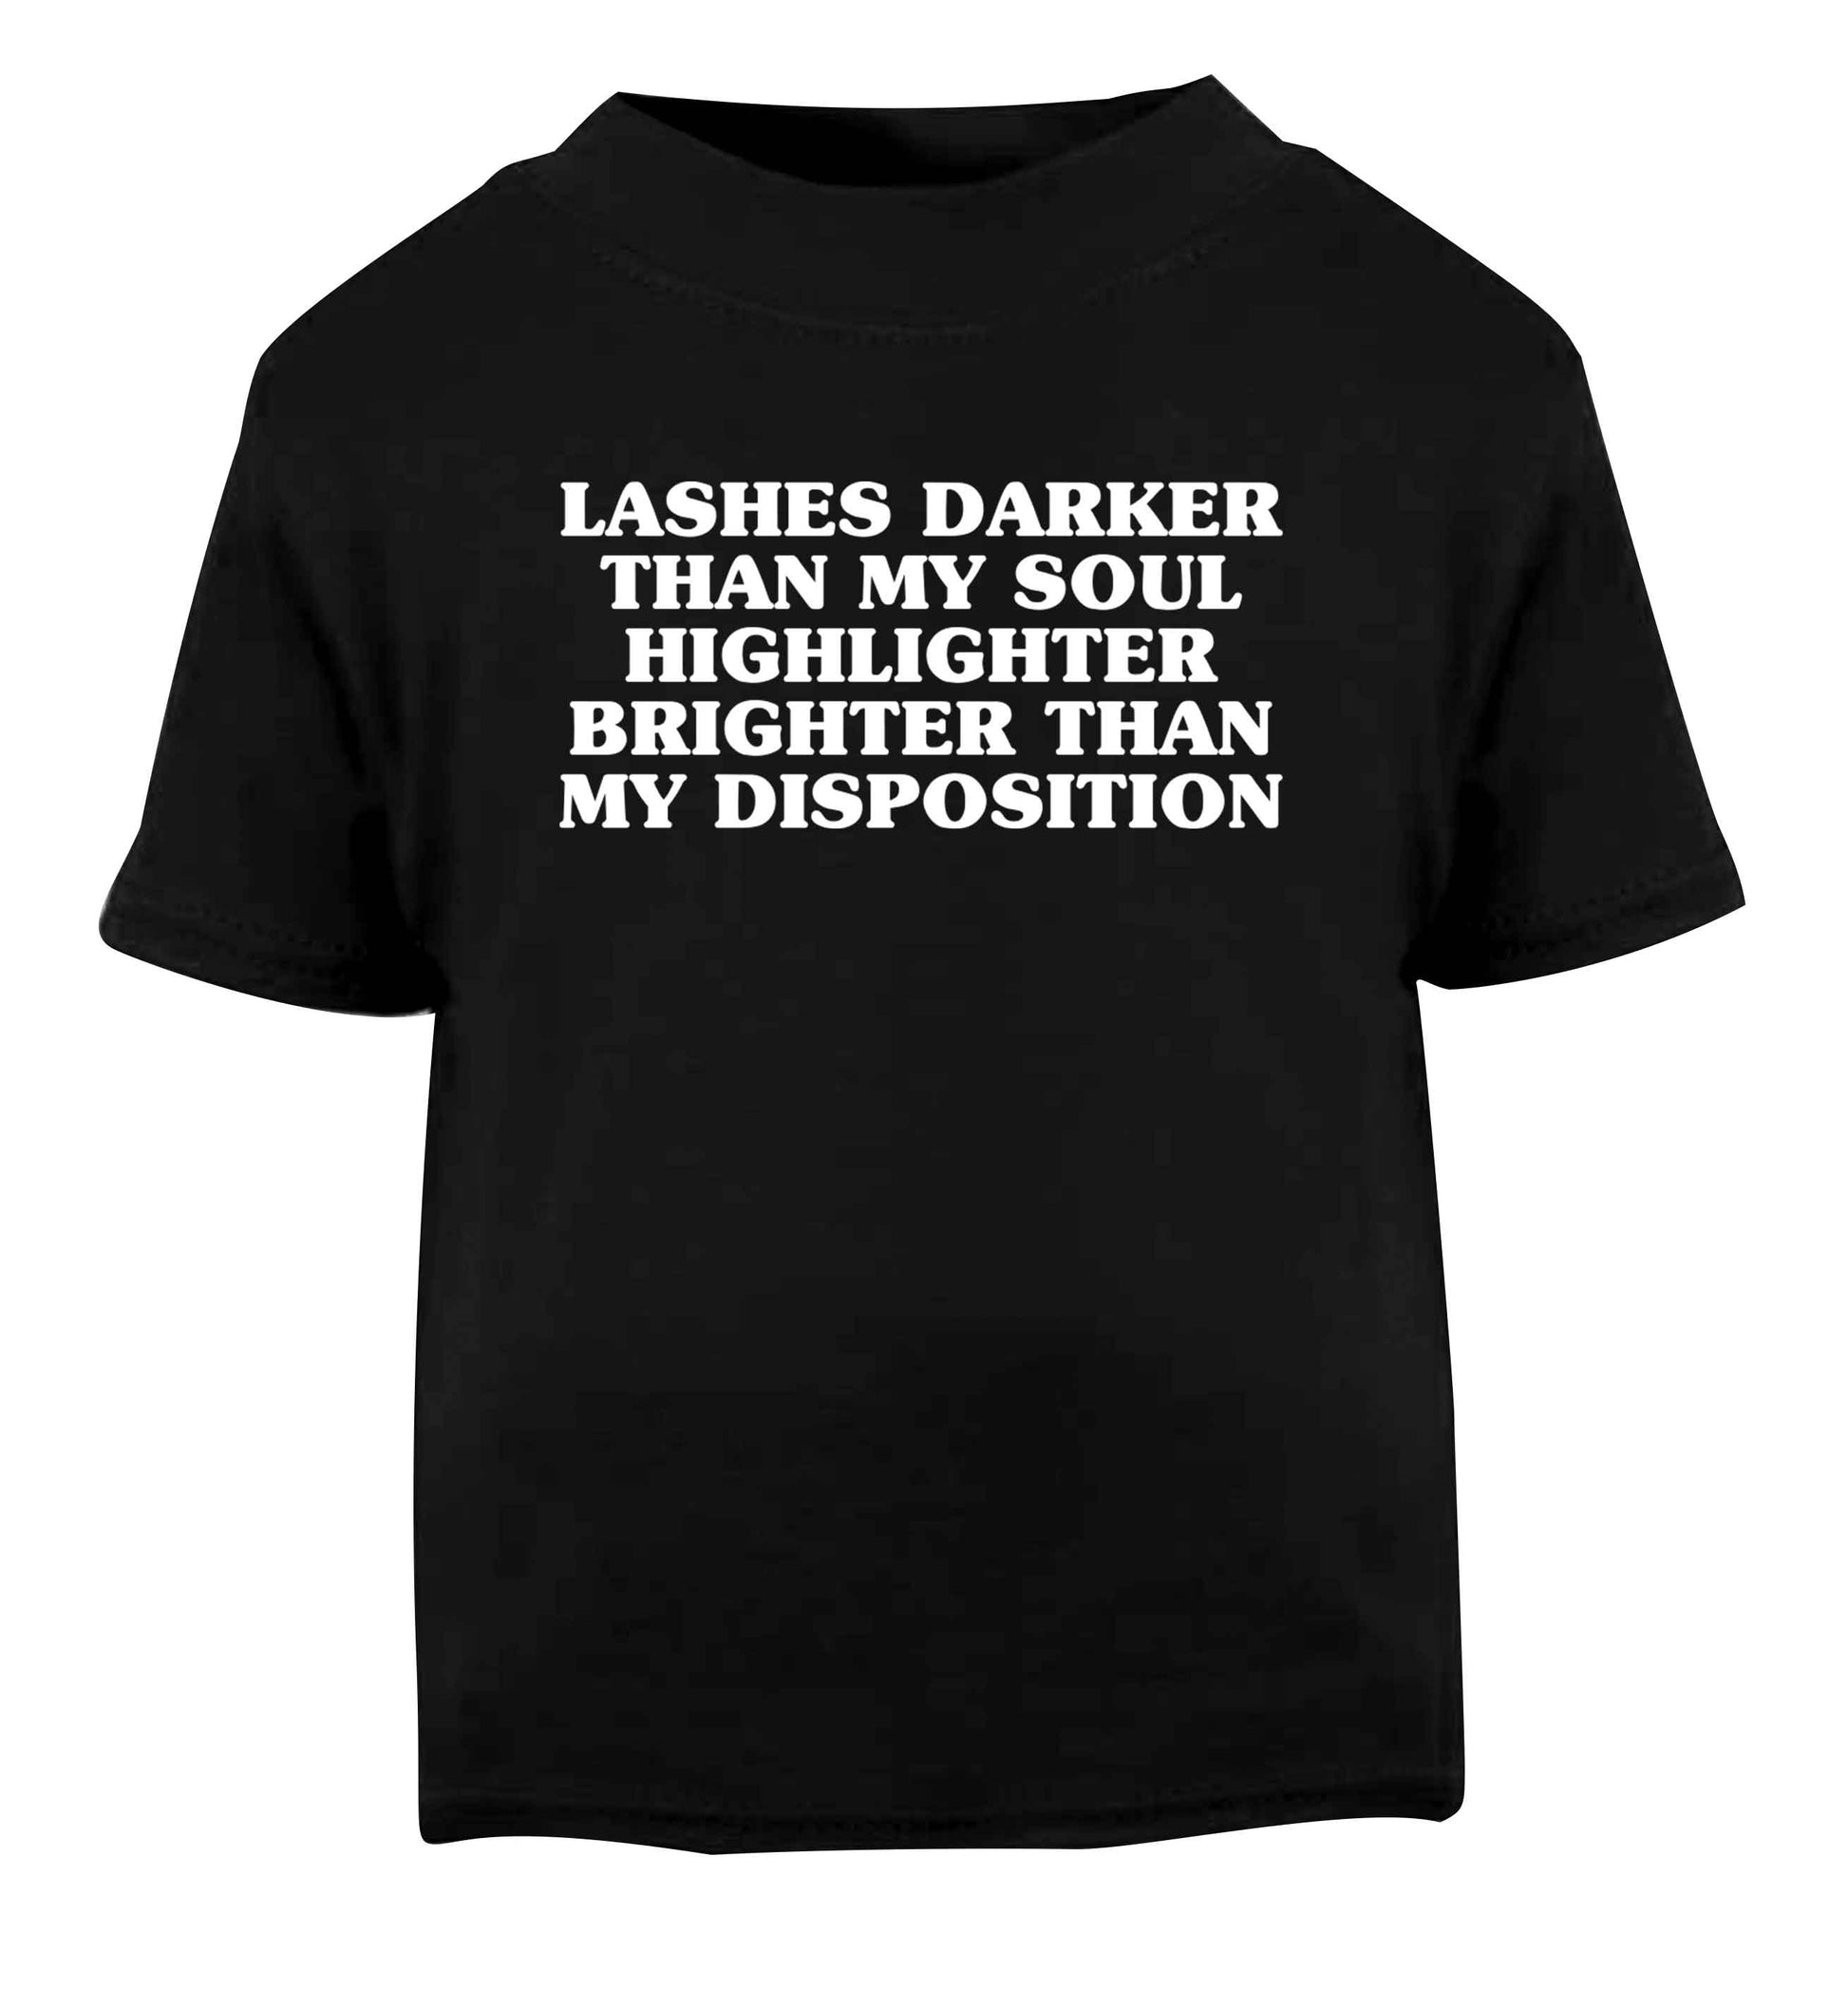 Lashes darker than my soul, highlighter brighter than my disposition Black Baby Toddler Tshirt 2 years